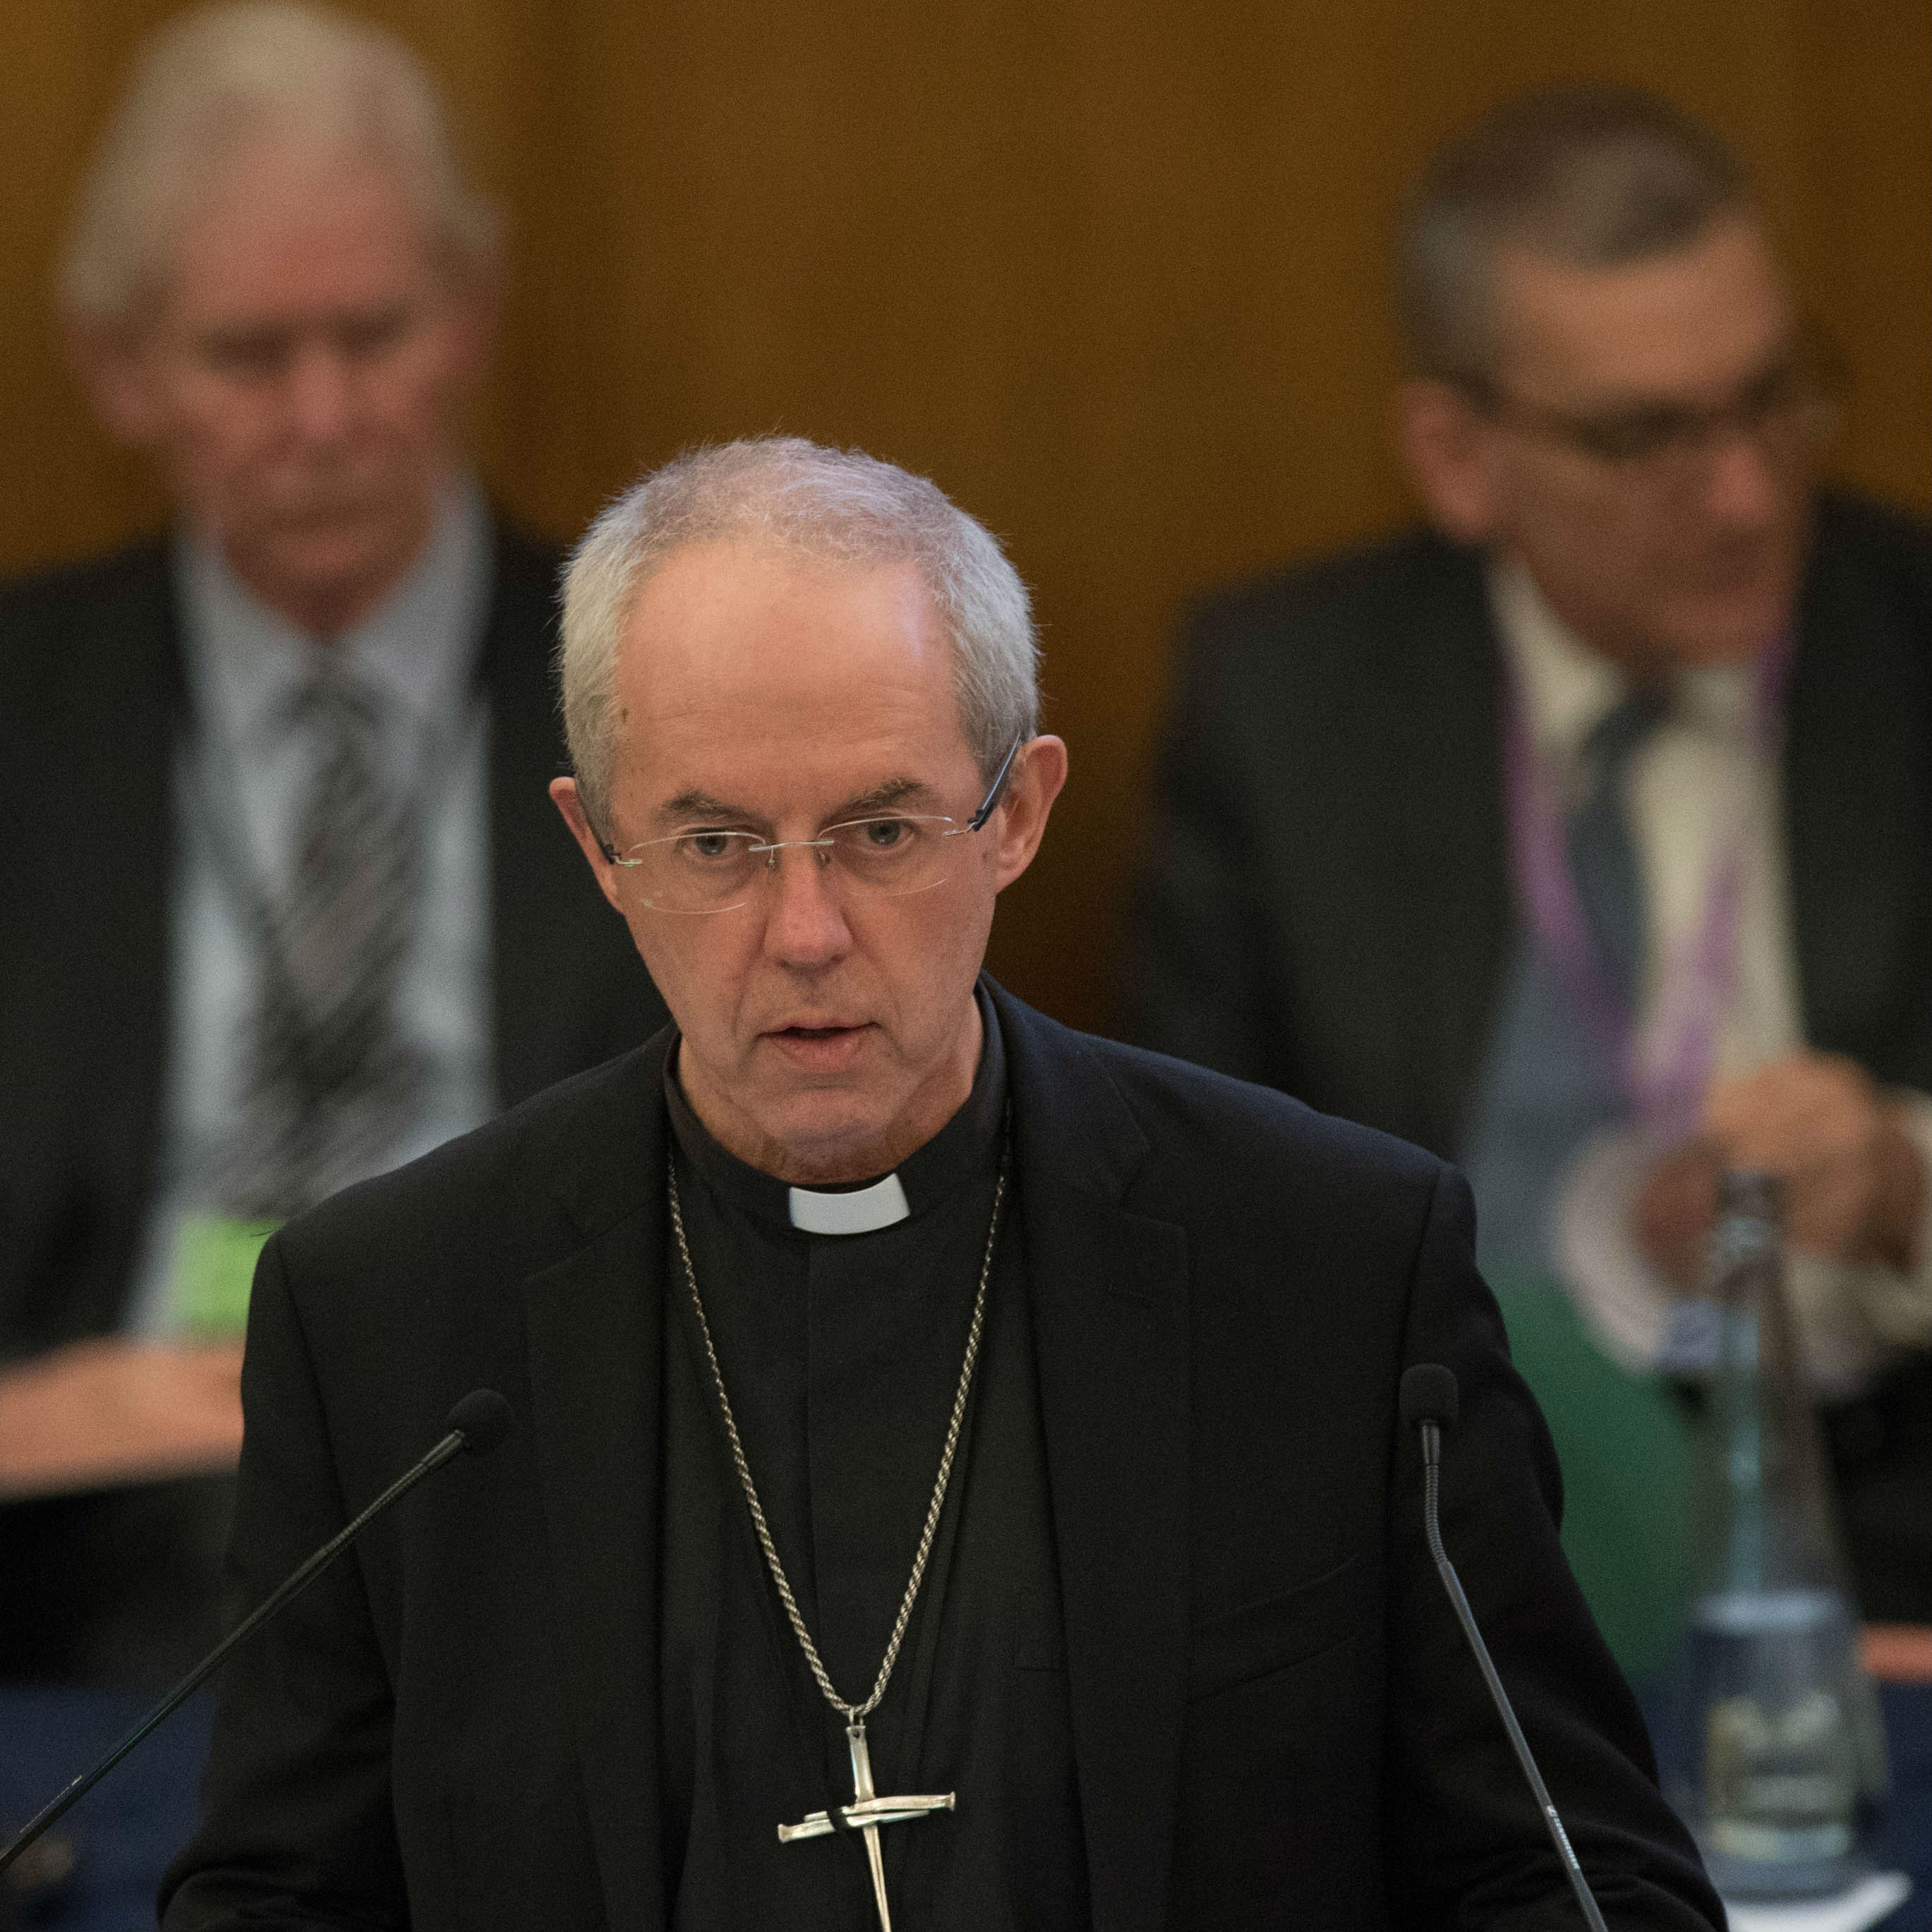 Accept Brexit and Trump, says Archbishop of Canterbury during General Synod opening address